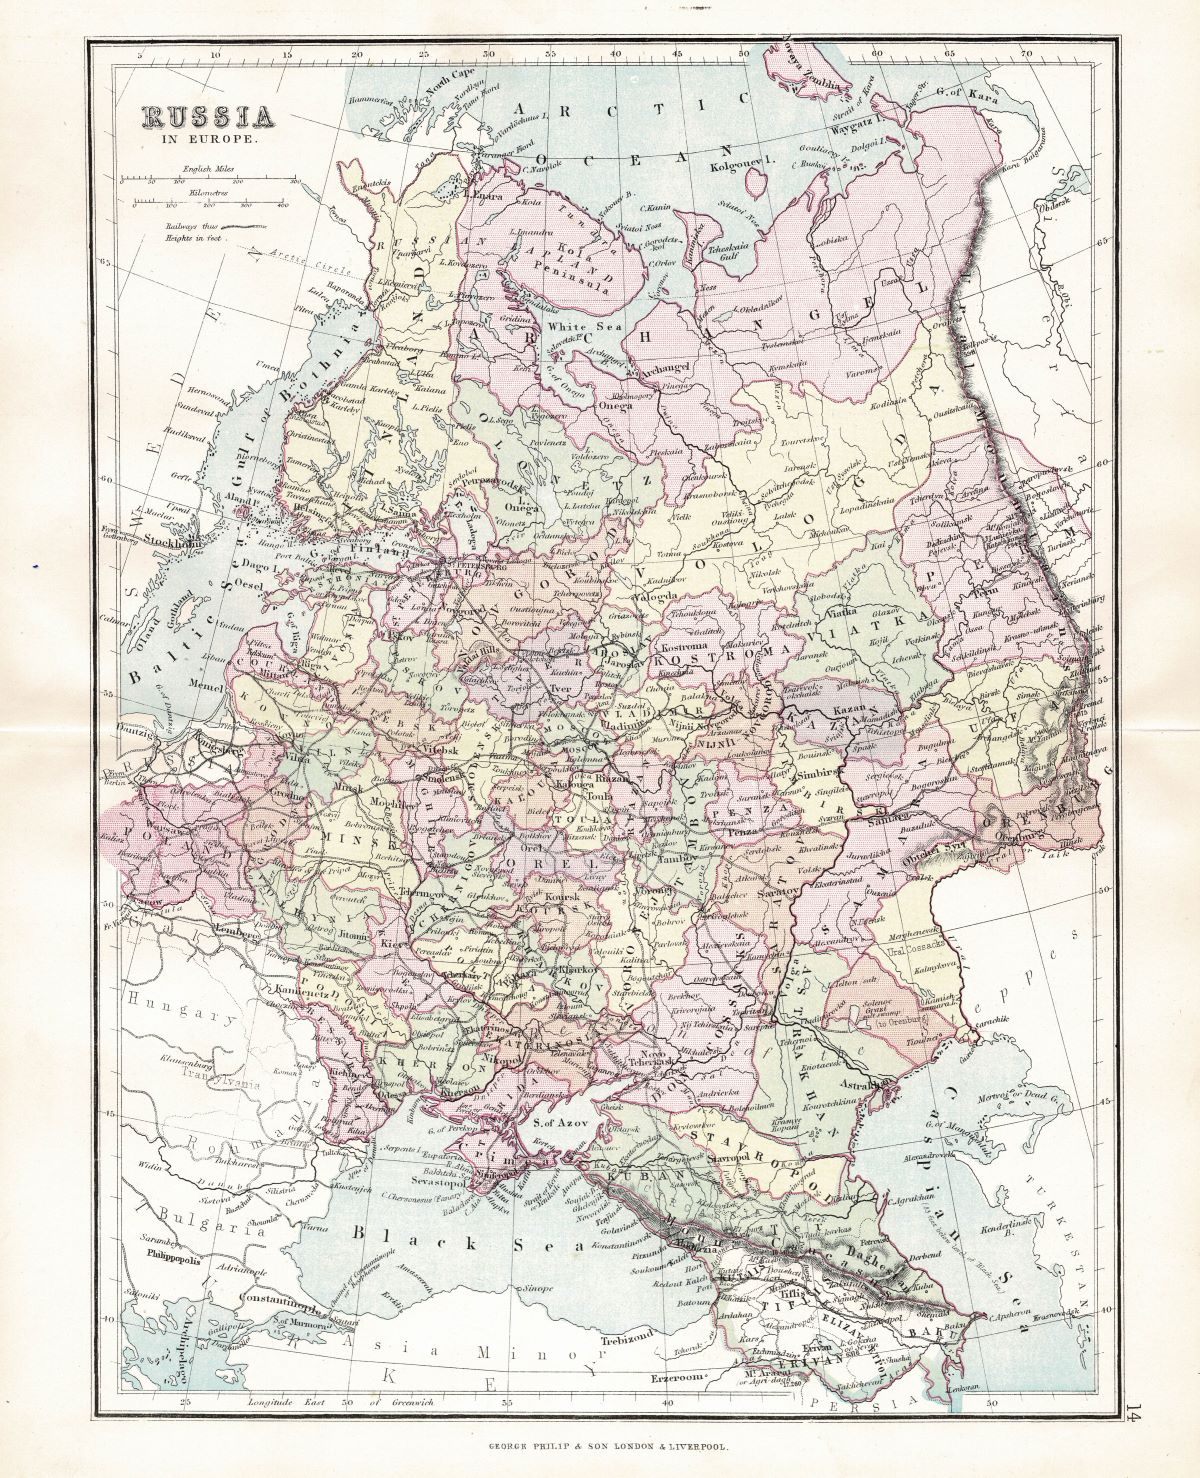 Russia in Europe antique map 1891